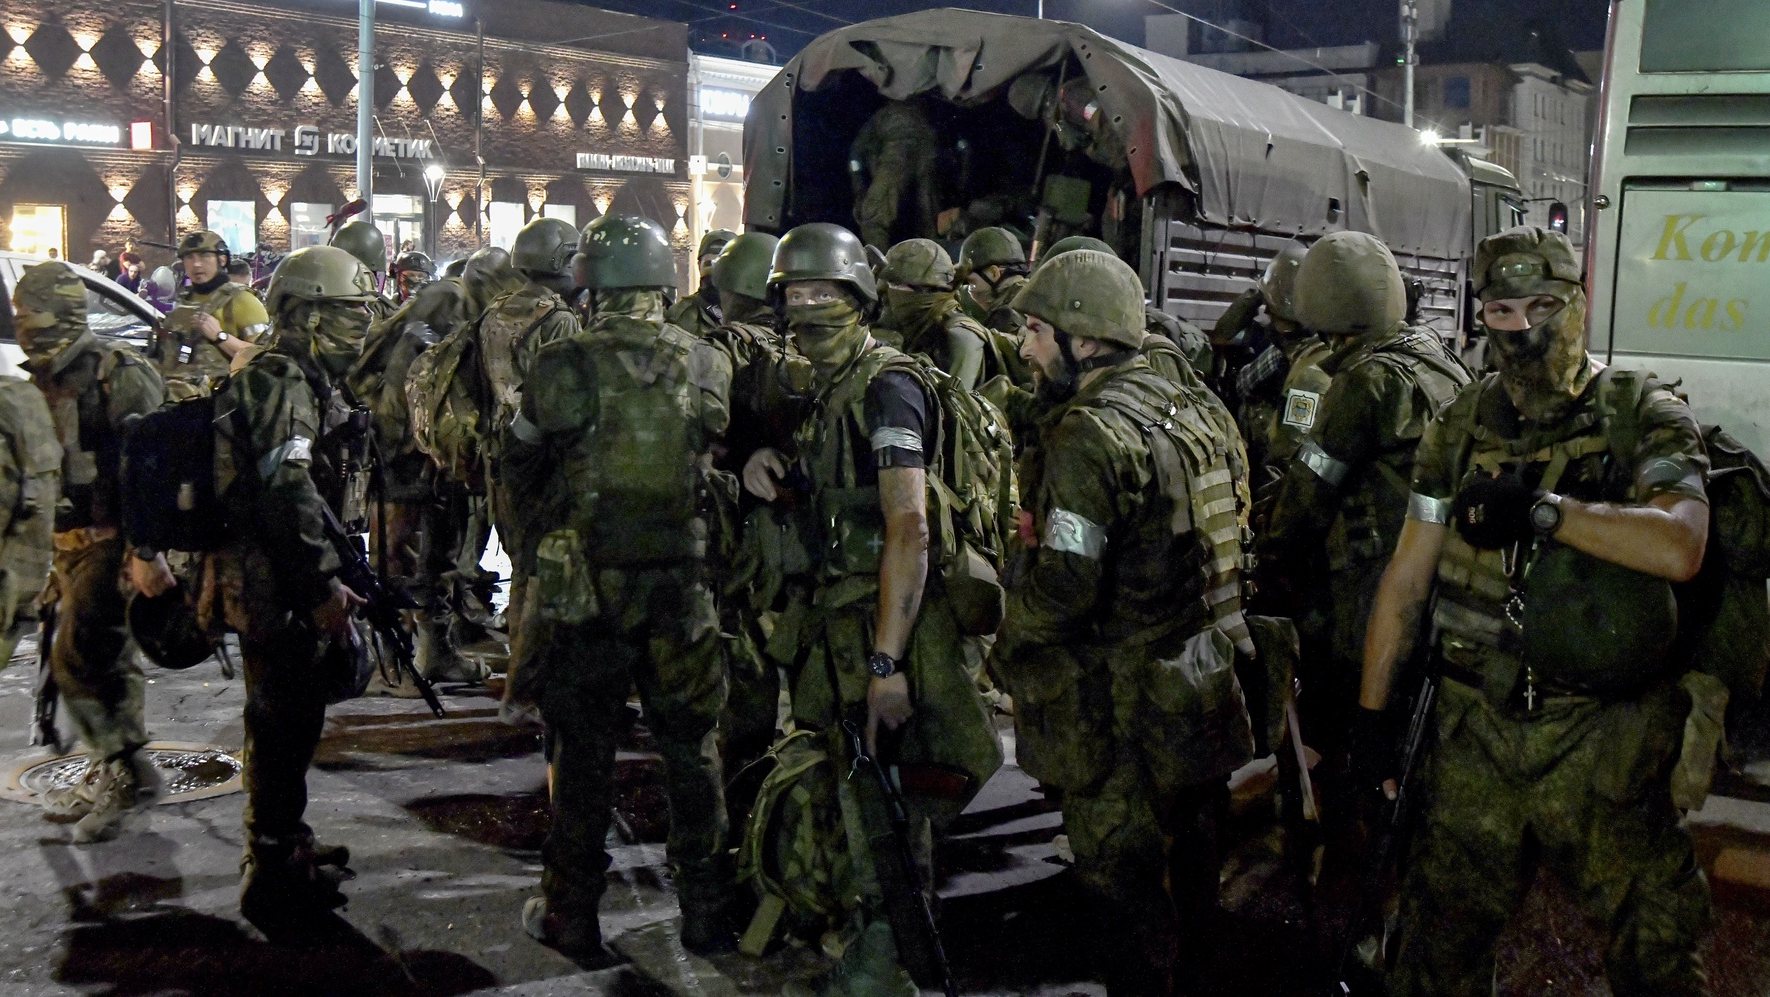 epa10710225 Private military company (PMC) Wagner Group servicemen prepare to leave downtown Rostov-on-Don, southern Russia, 24 June 2023. Security and armoured vehicles were deployed after the Chief of the private military company (PMC) Wagner Group said in a video that his troops had occupied the building of the headquarters of the Southern Military District, demanding a meeting with Russia&#039;s defense chiefs. The President of Belarus held talks with the head of the Wagner group, as a result of which he accepted a proposal to stop the movement of the group&#039;s fighters across Russia, the press service of the President of Belarus reported. The Chief of Wagner Group has said that columns of his group will return to field camps.  EPA/ARKADY BUDNITSKY